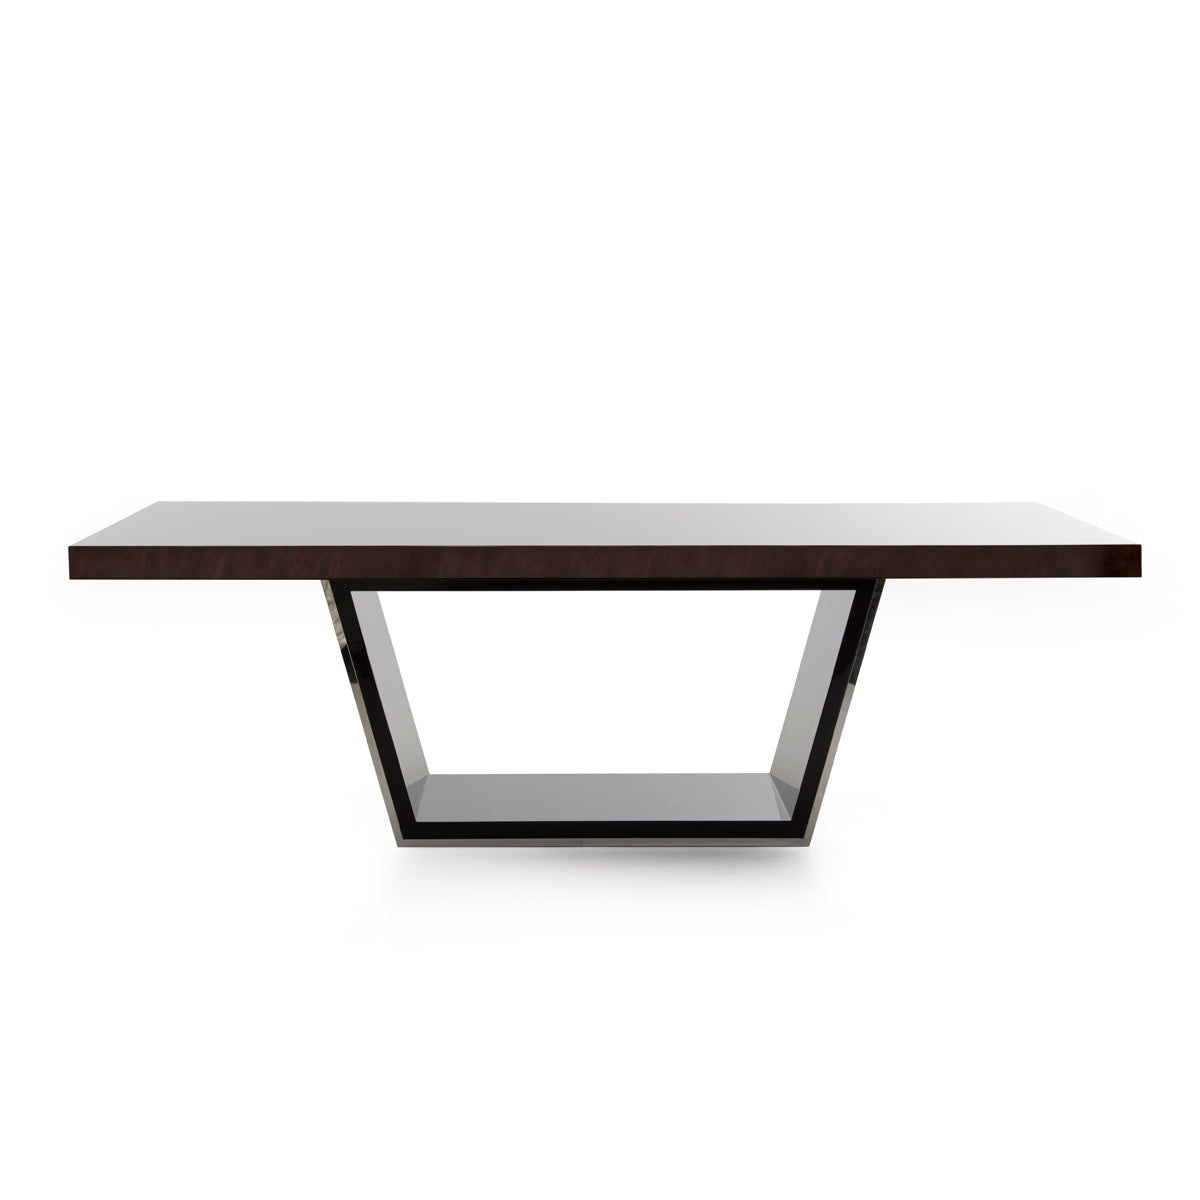 HomeRoots 30" High Gloss MDF And Steel Dining Table In Ebony Finish